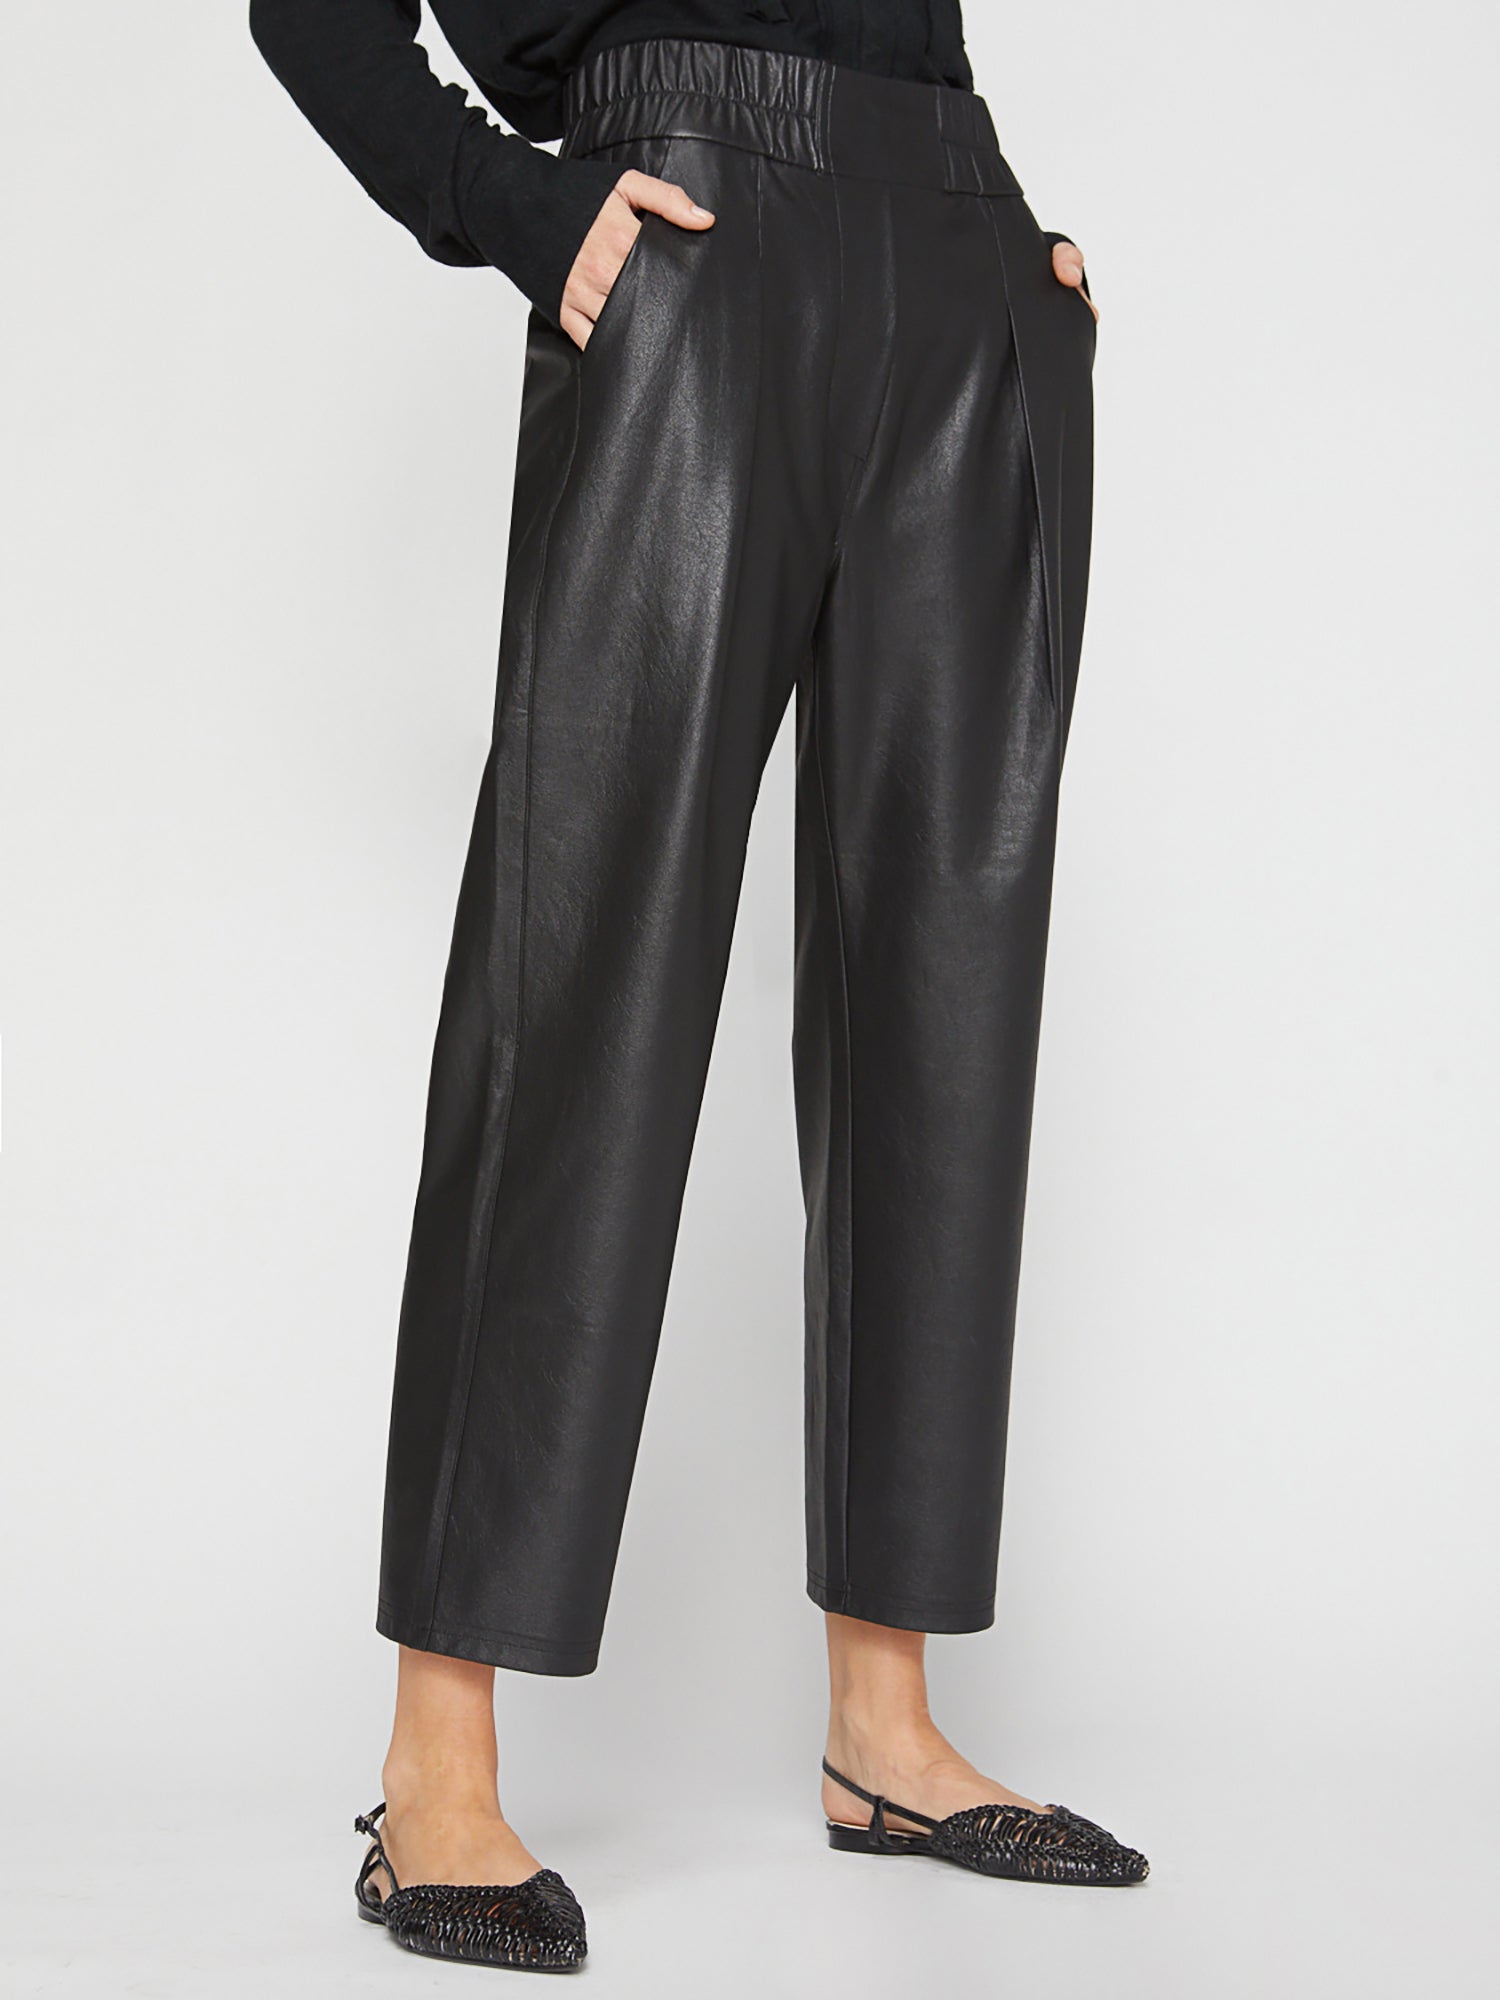 Fiera black vegan leather cropped pant side view